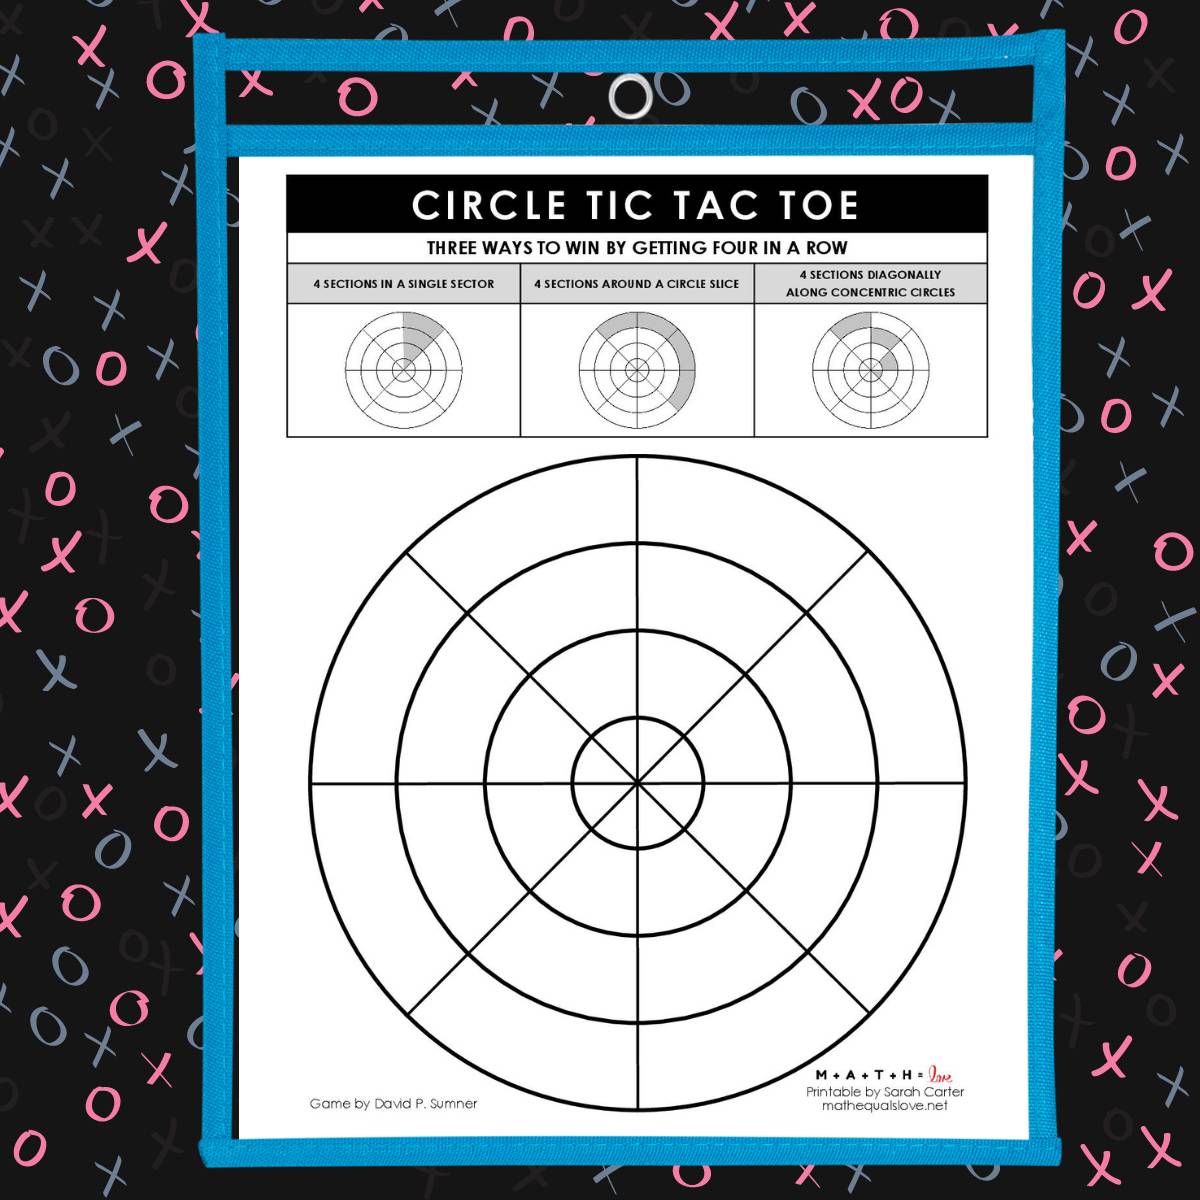 Sarah Carter on X: Can you solve the Tic Tac Toe Challenge? All